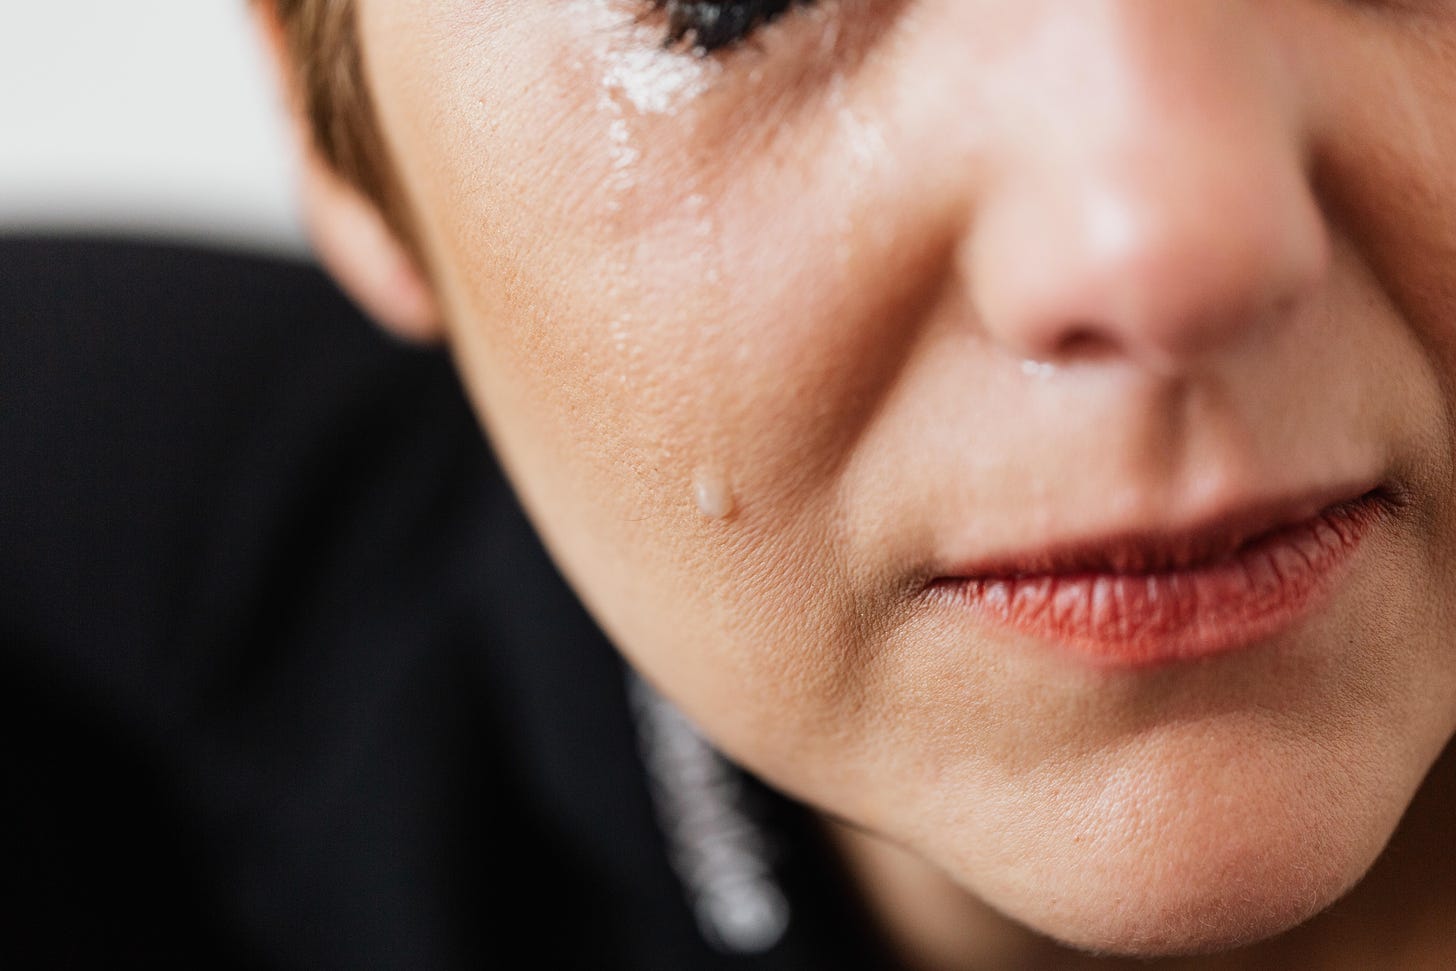 A close-up of a woman crying.